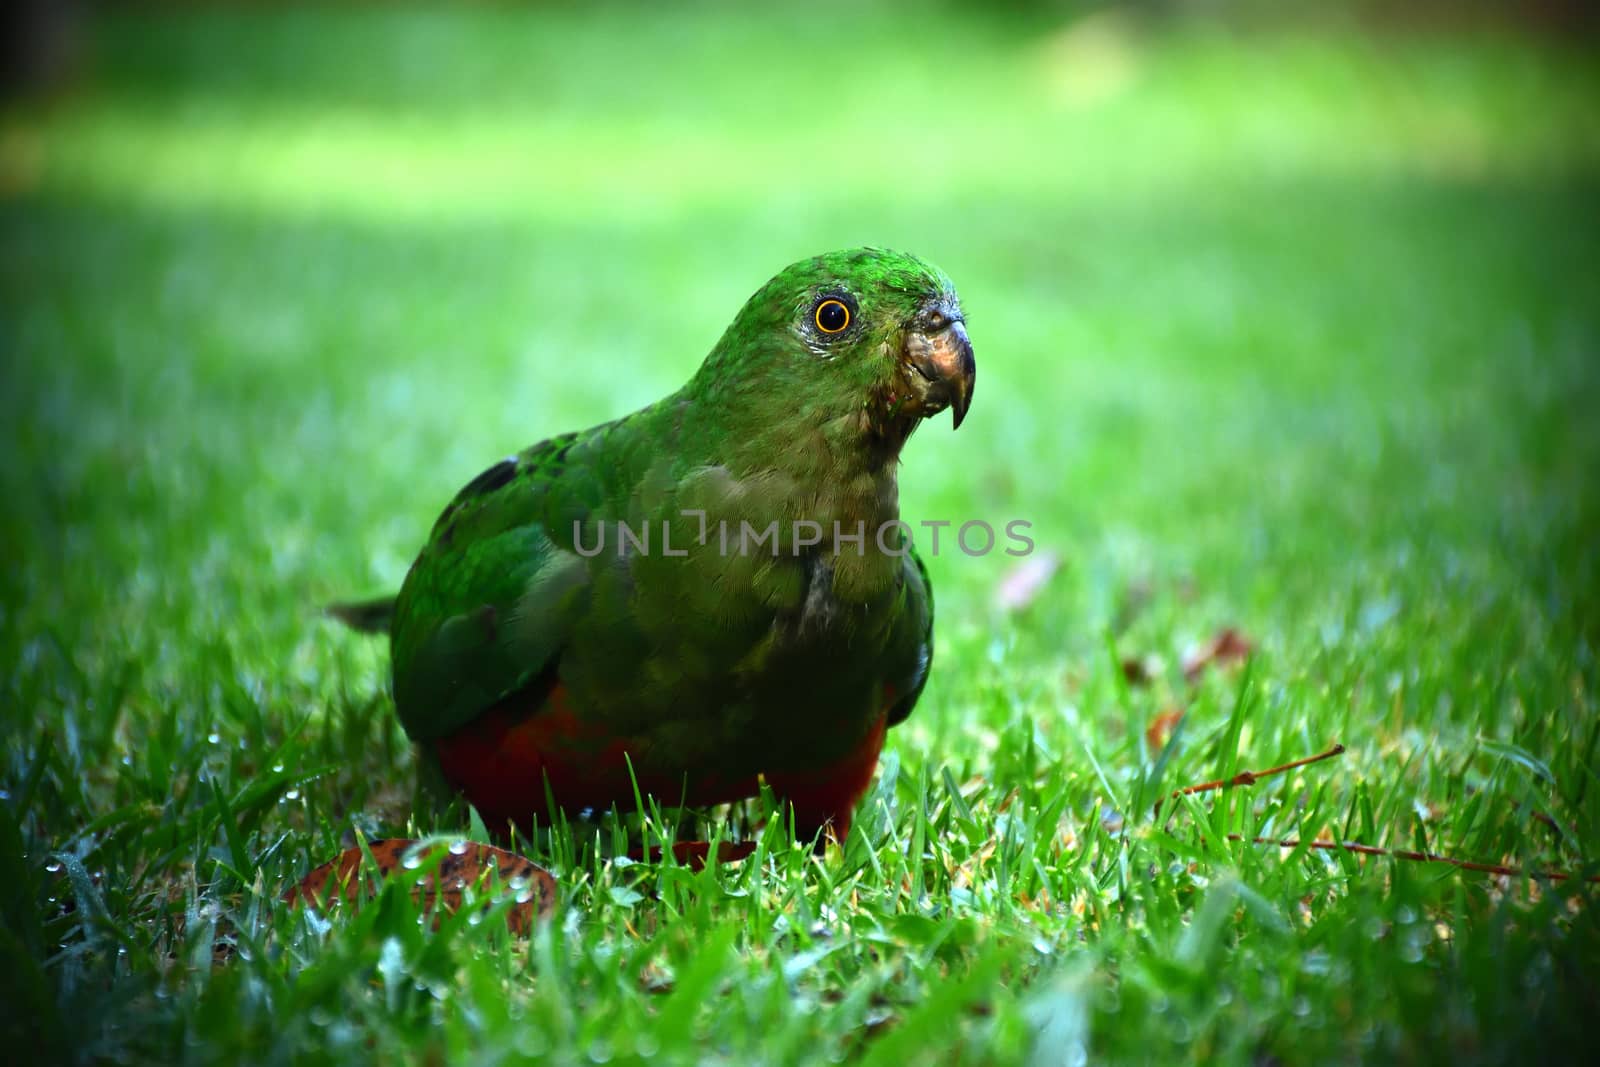 A female King Parrot standing on green grass